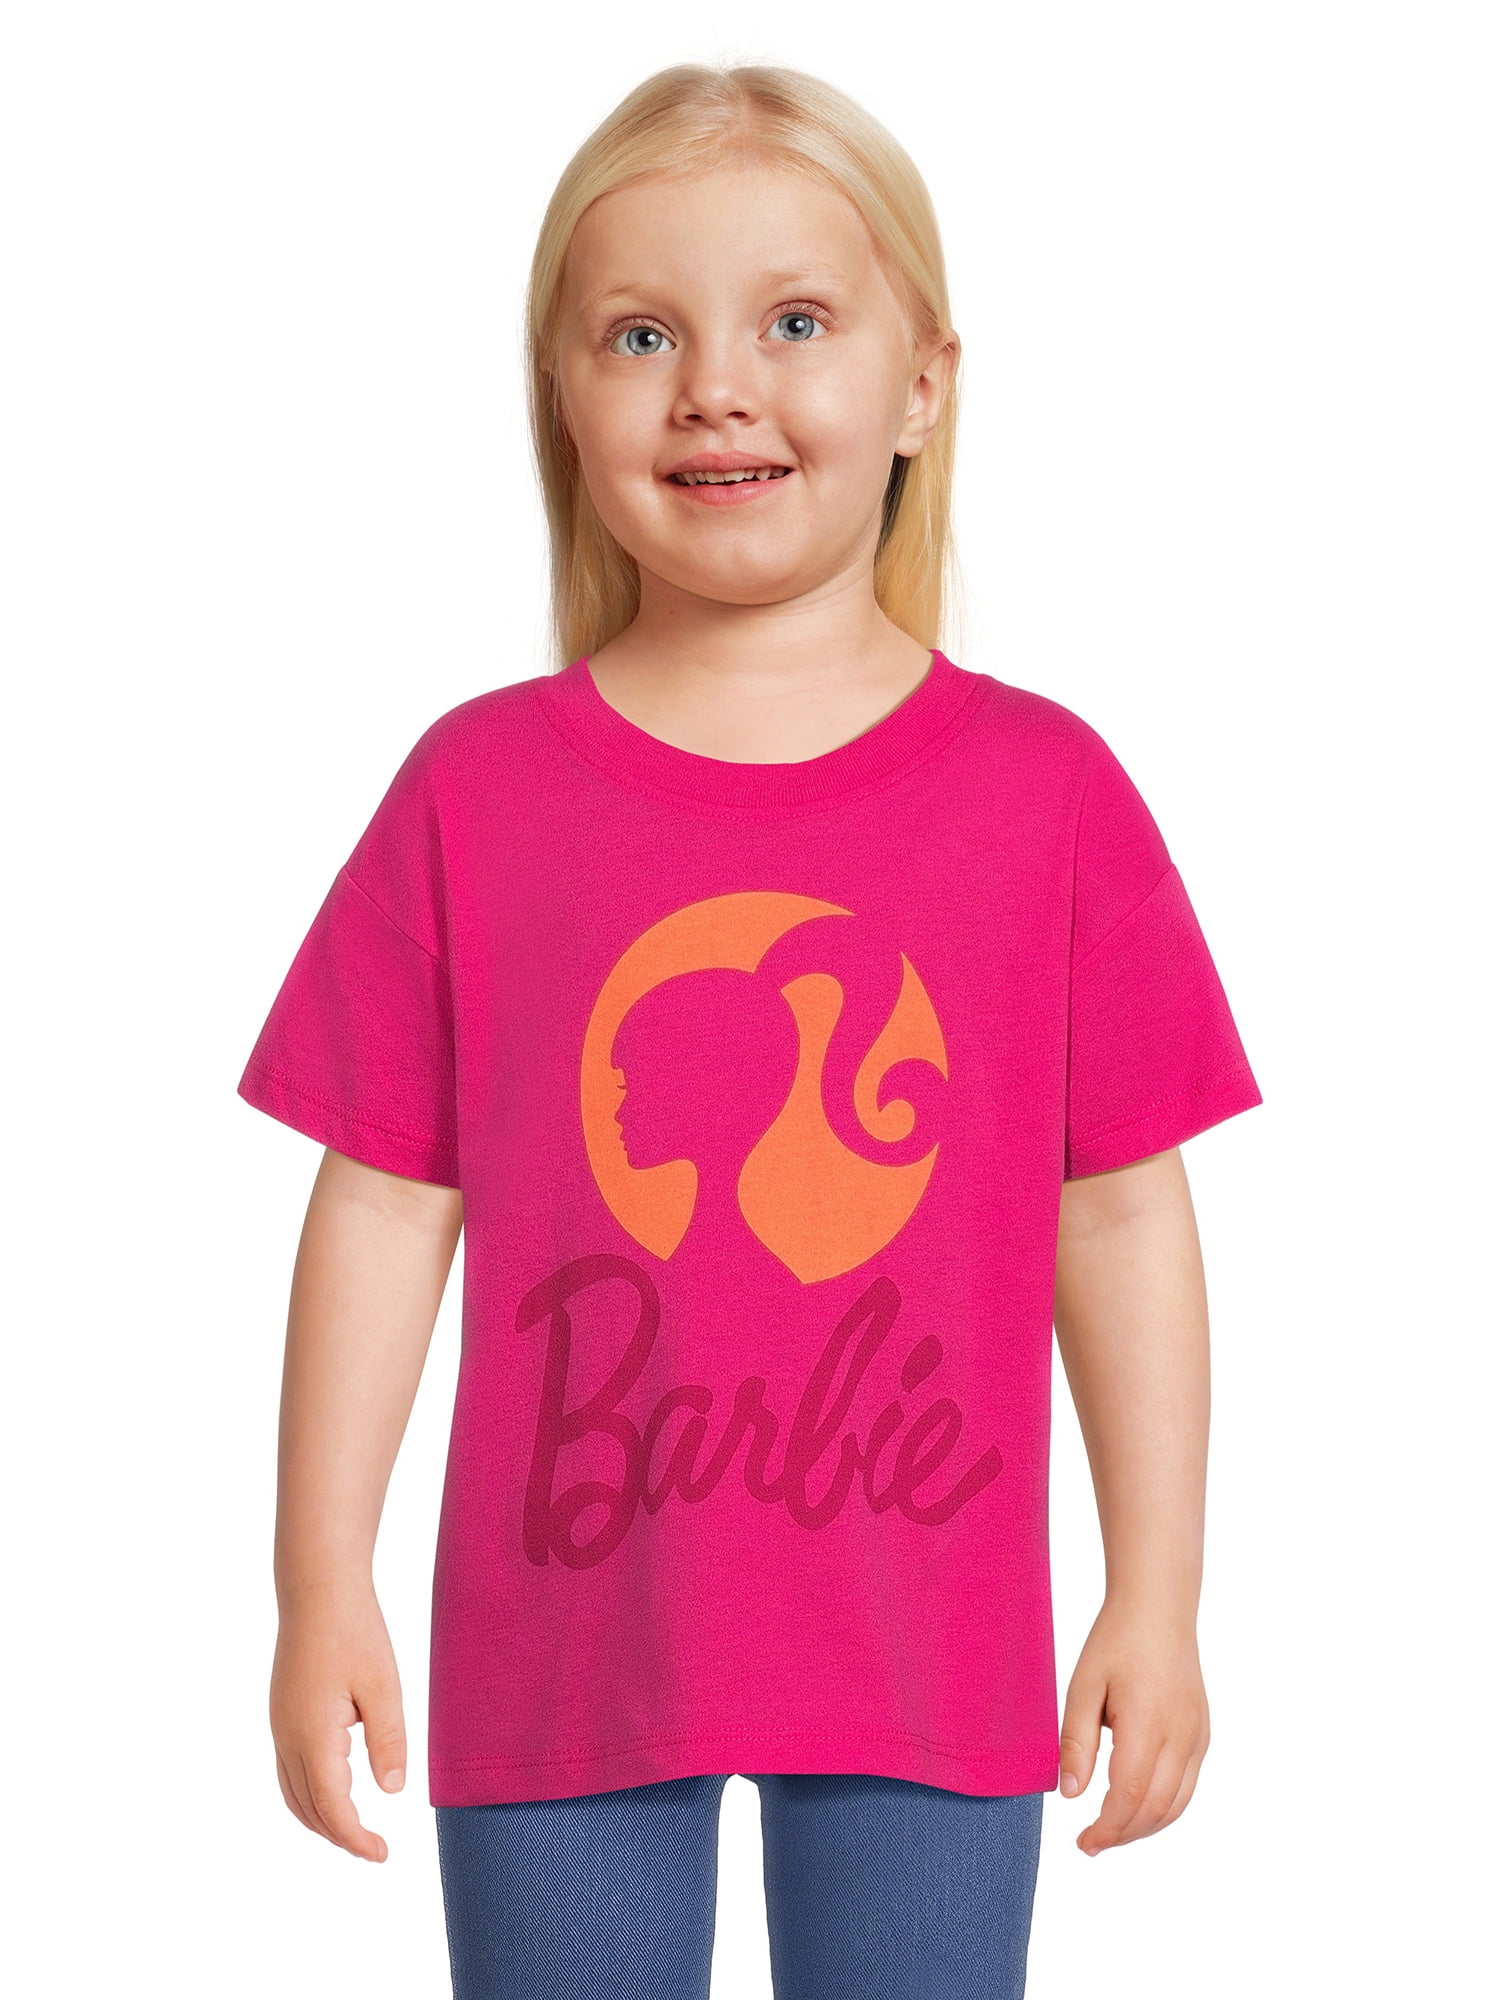 Barbie - Love Yourself - Toddler And Youth Short Sleeve Graphic T-Shirt